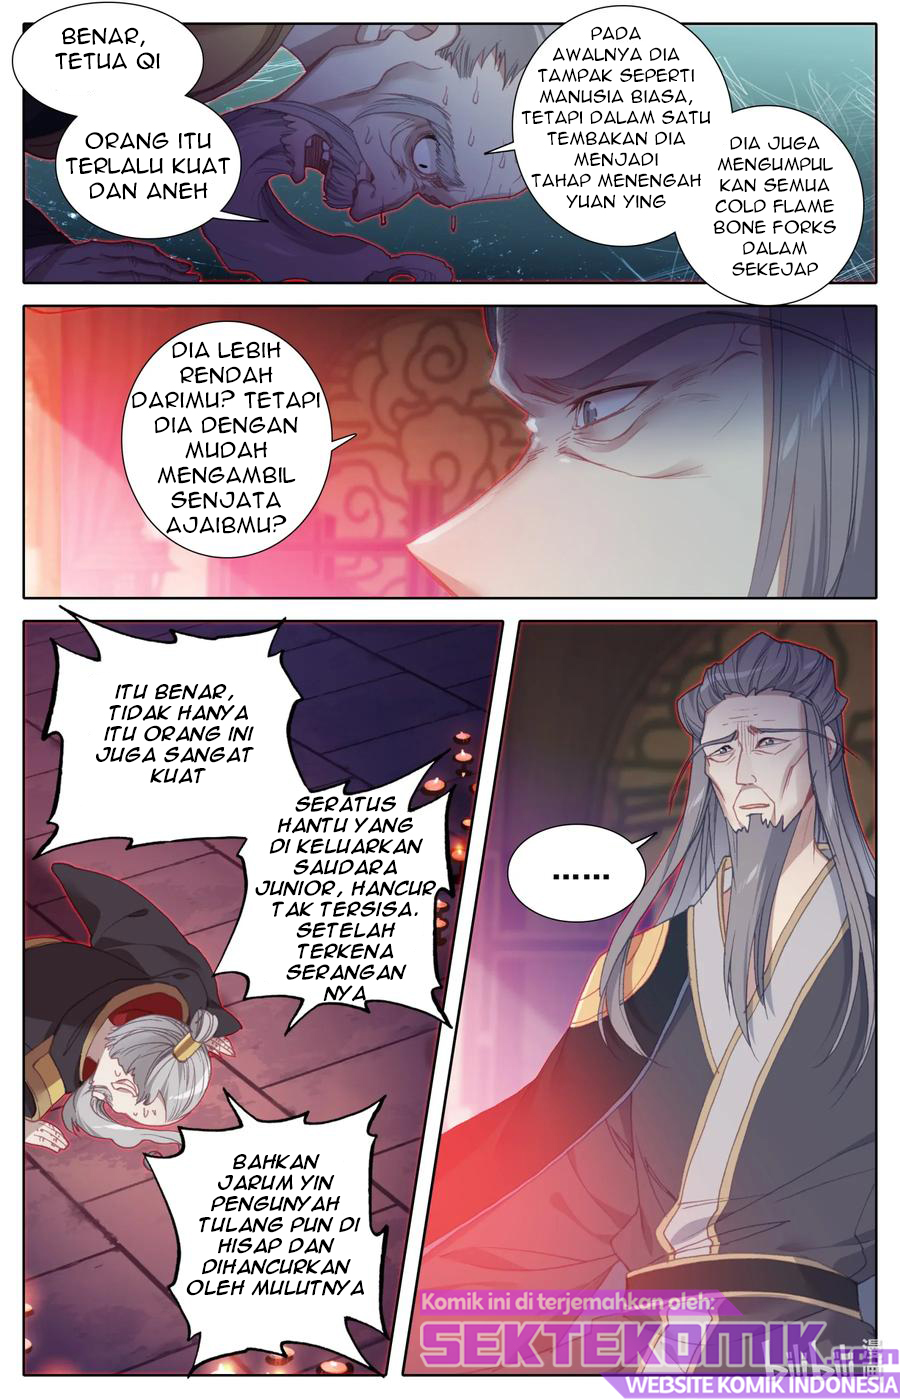 Mortal Cultivation Fairy World Chapter 25